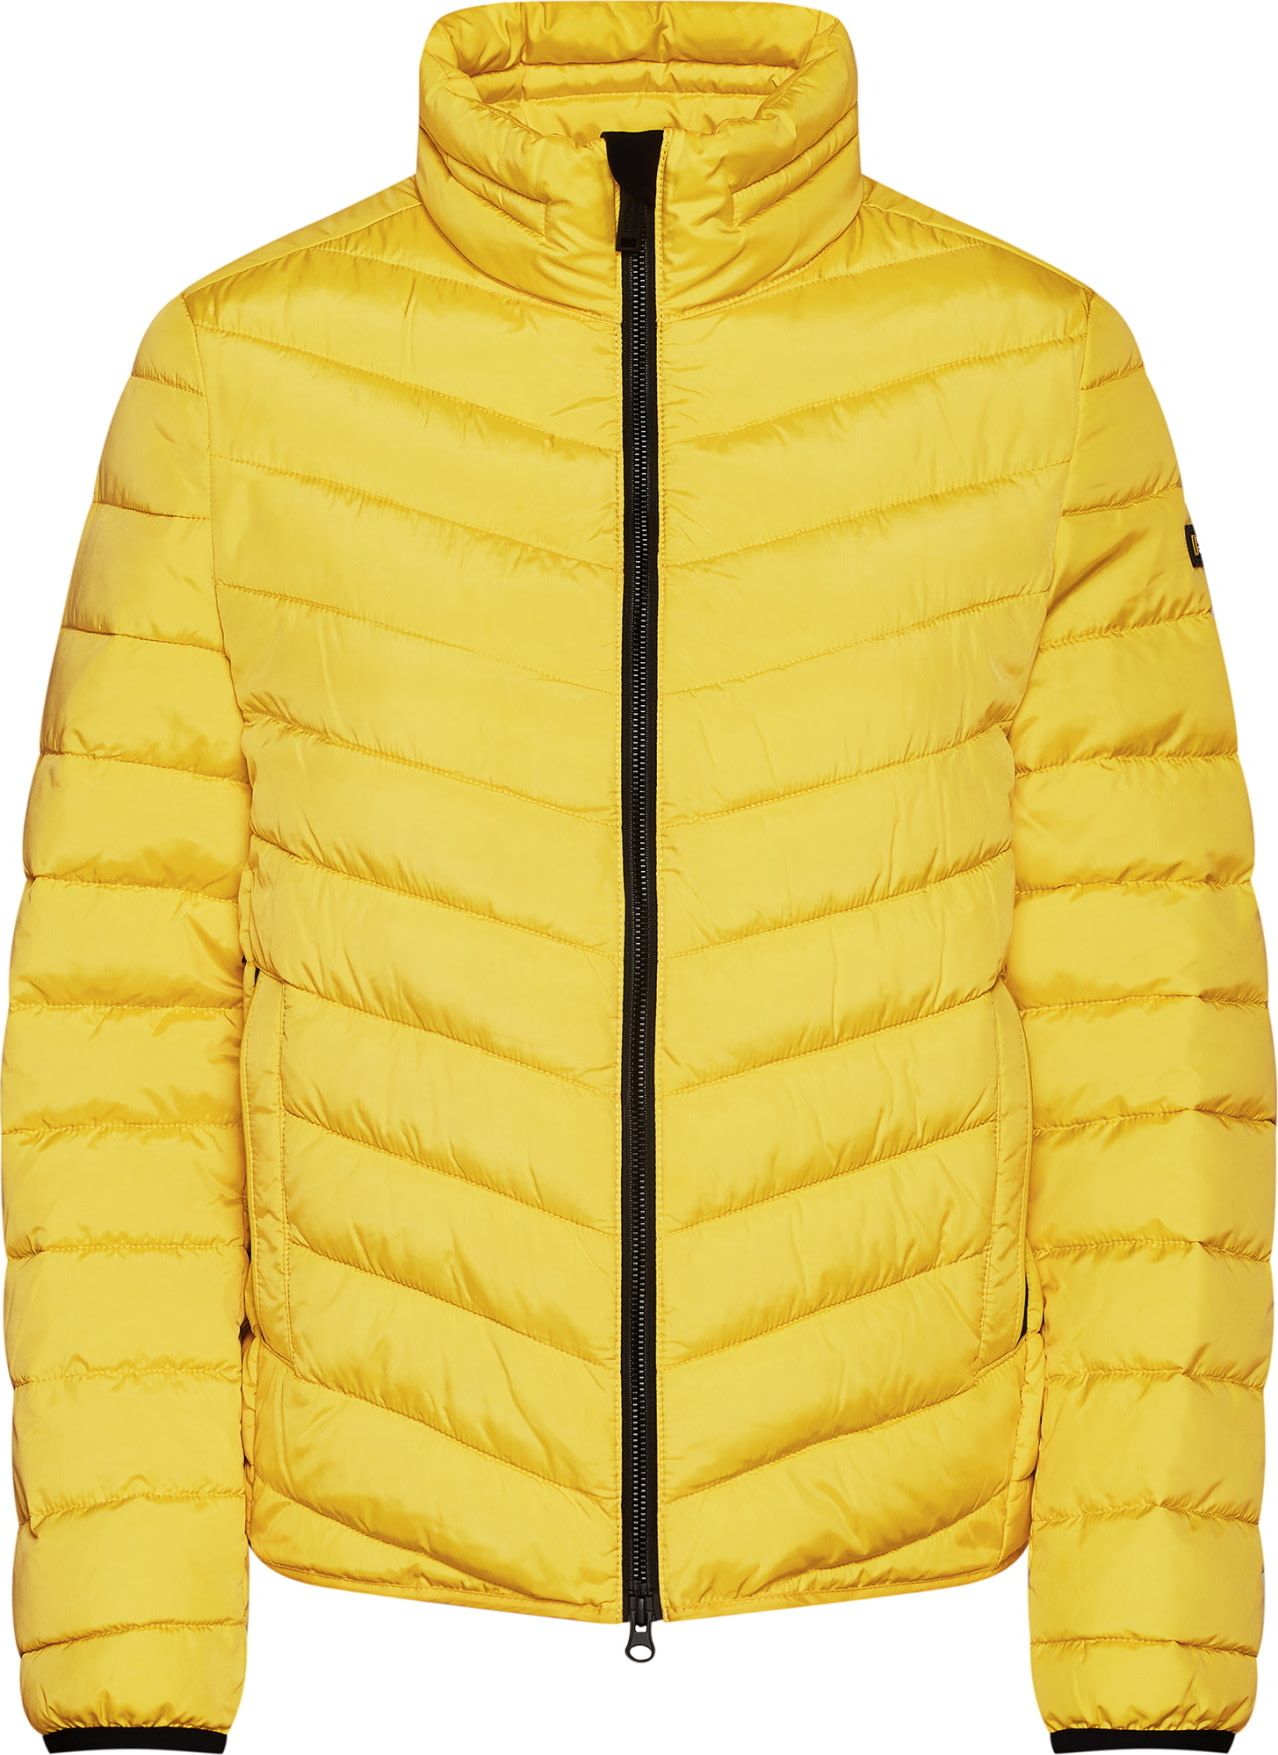 National Geographic Women's Puffer Jacket lightgold